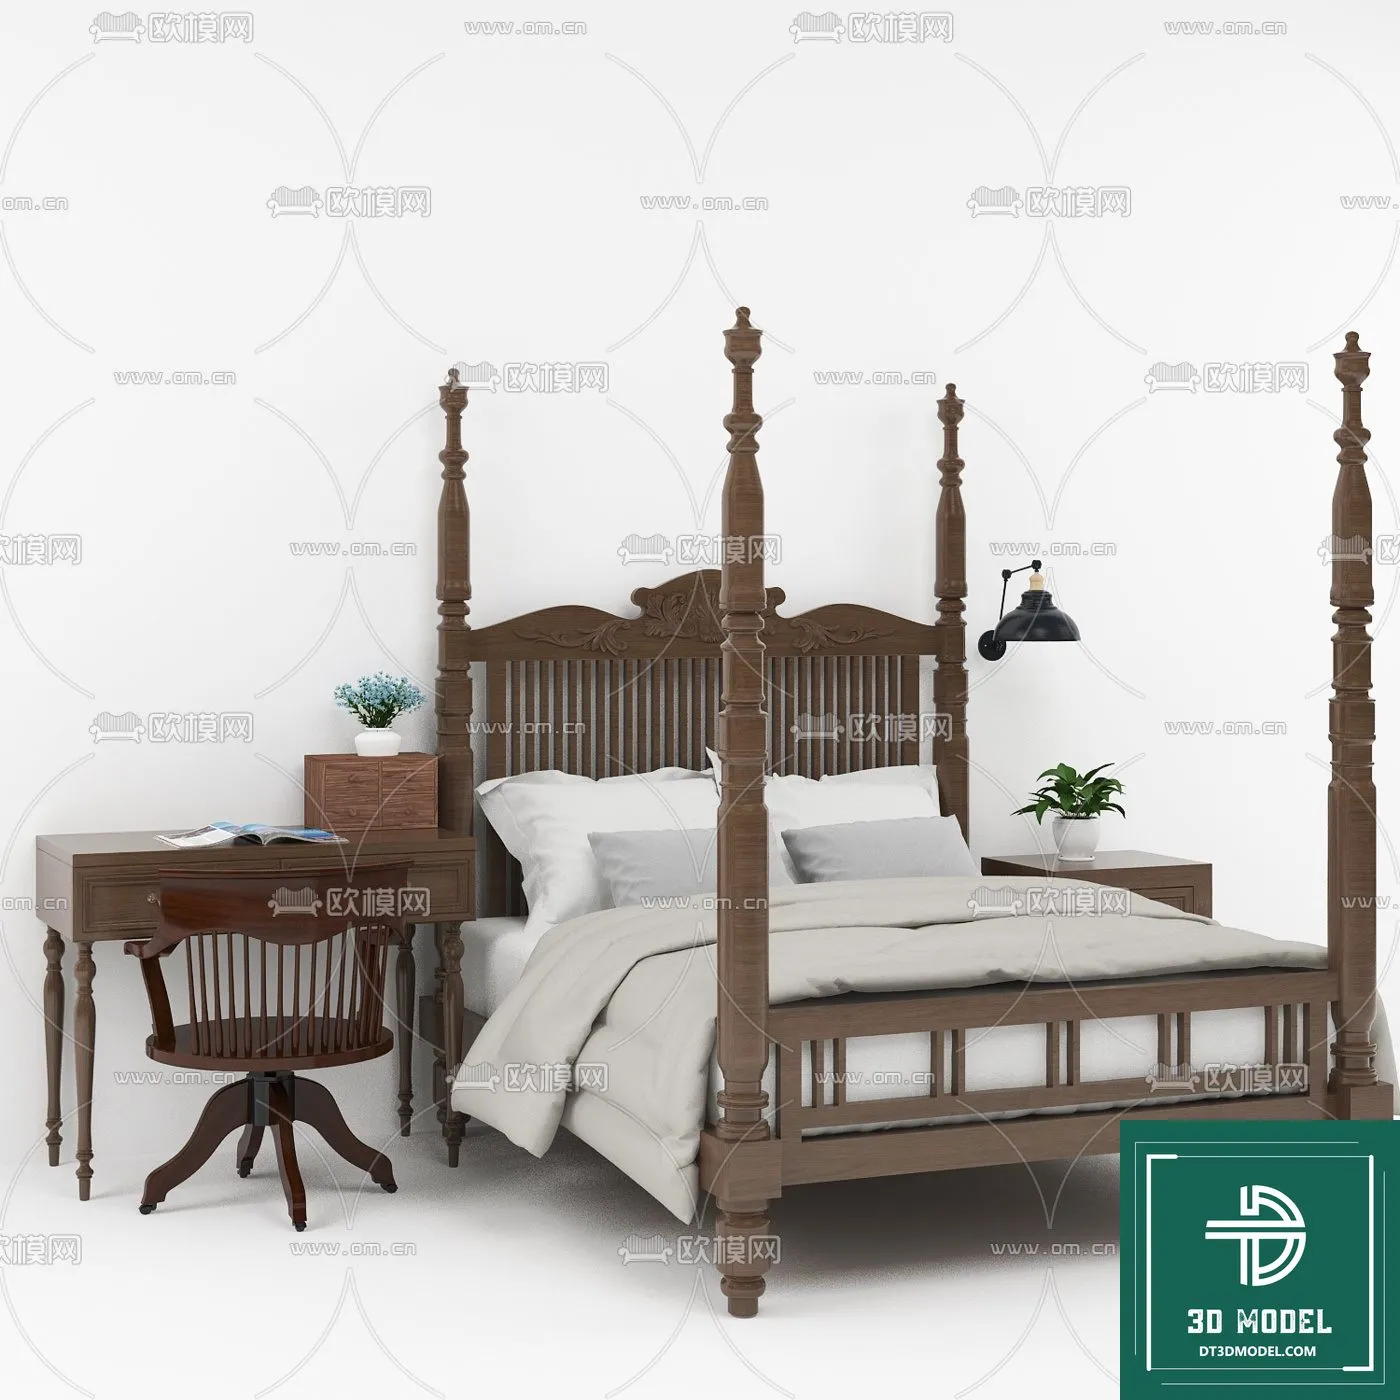 INDOCHINE STYLE – 3D MODELS – 202